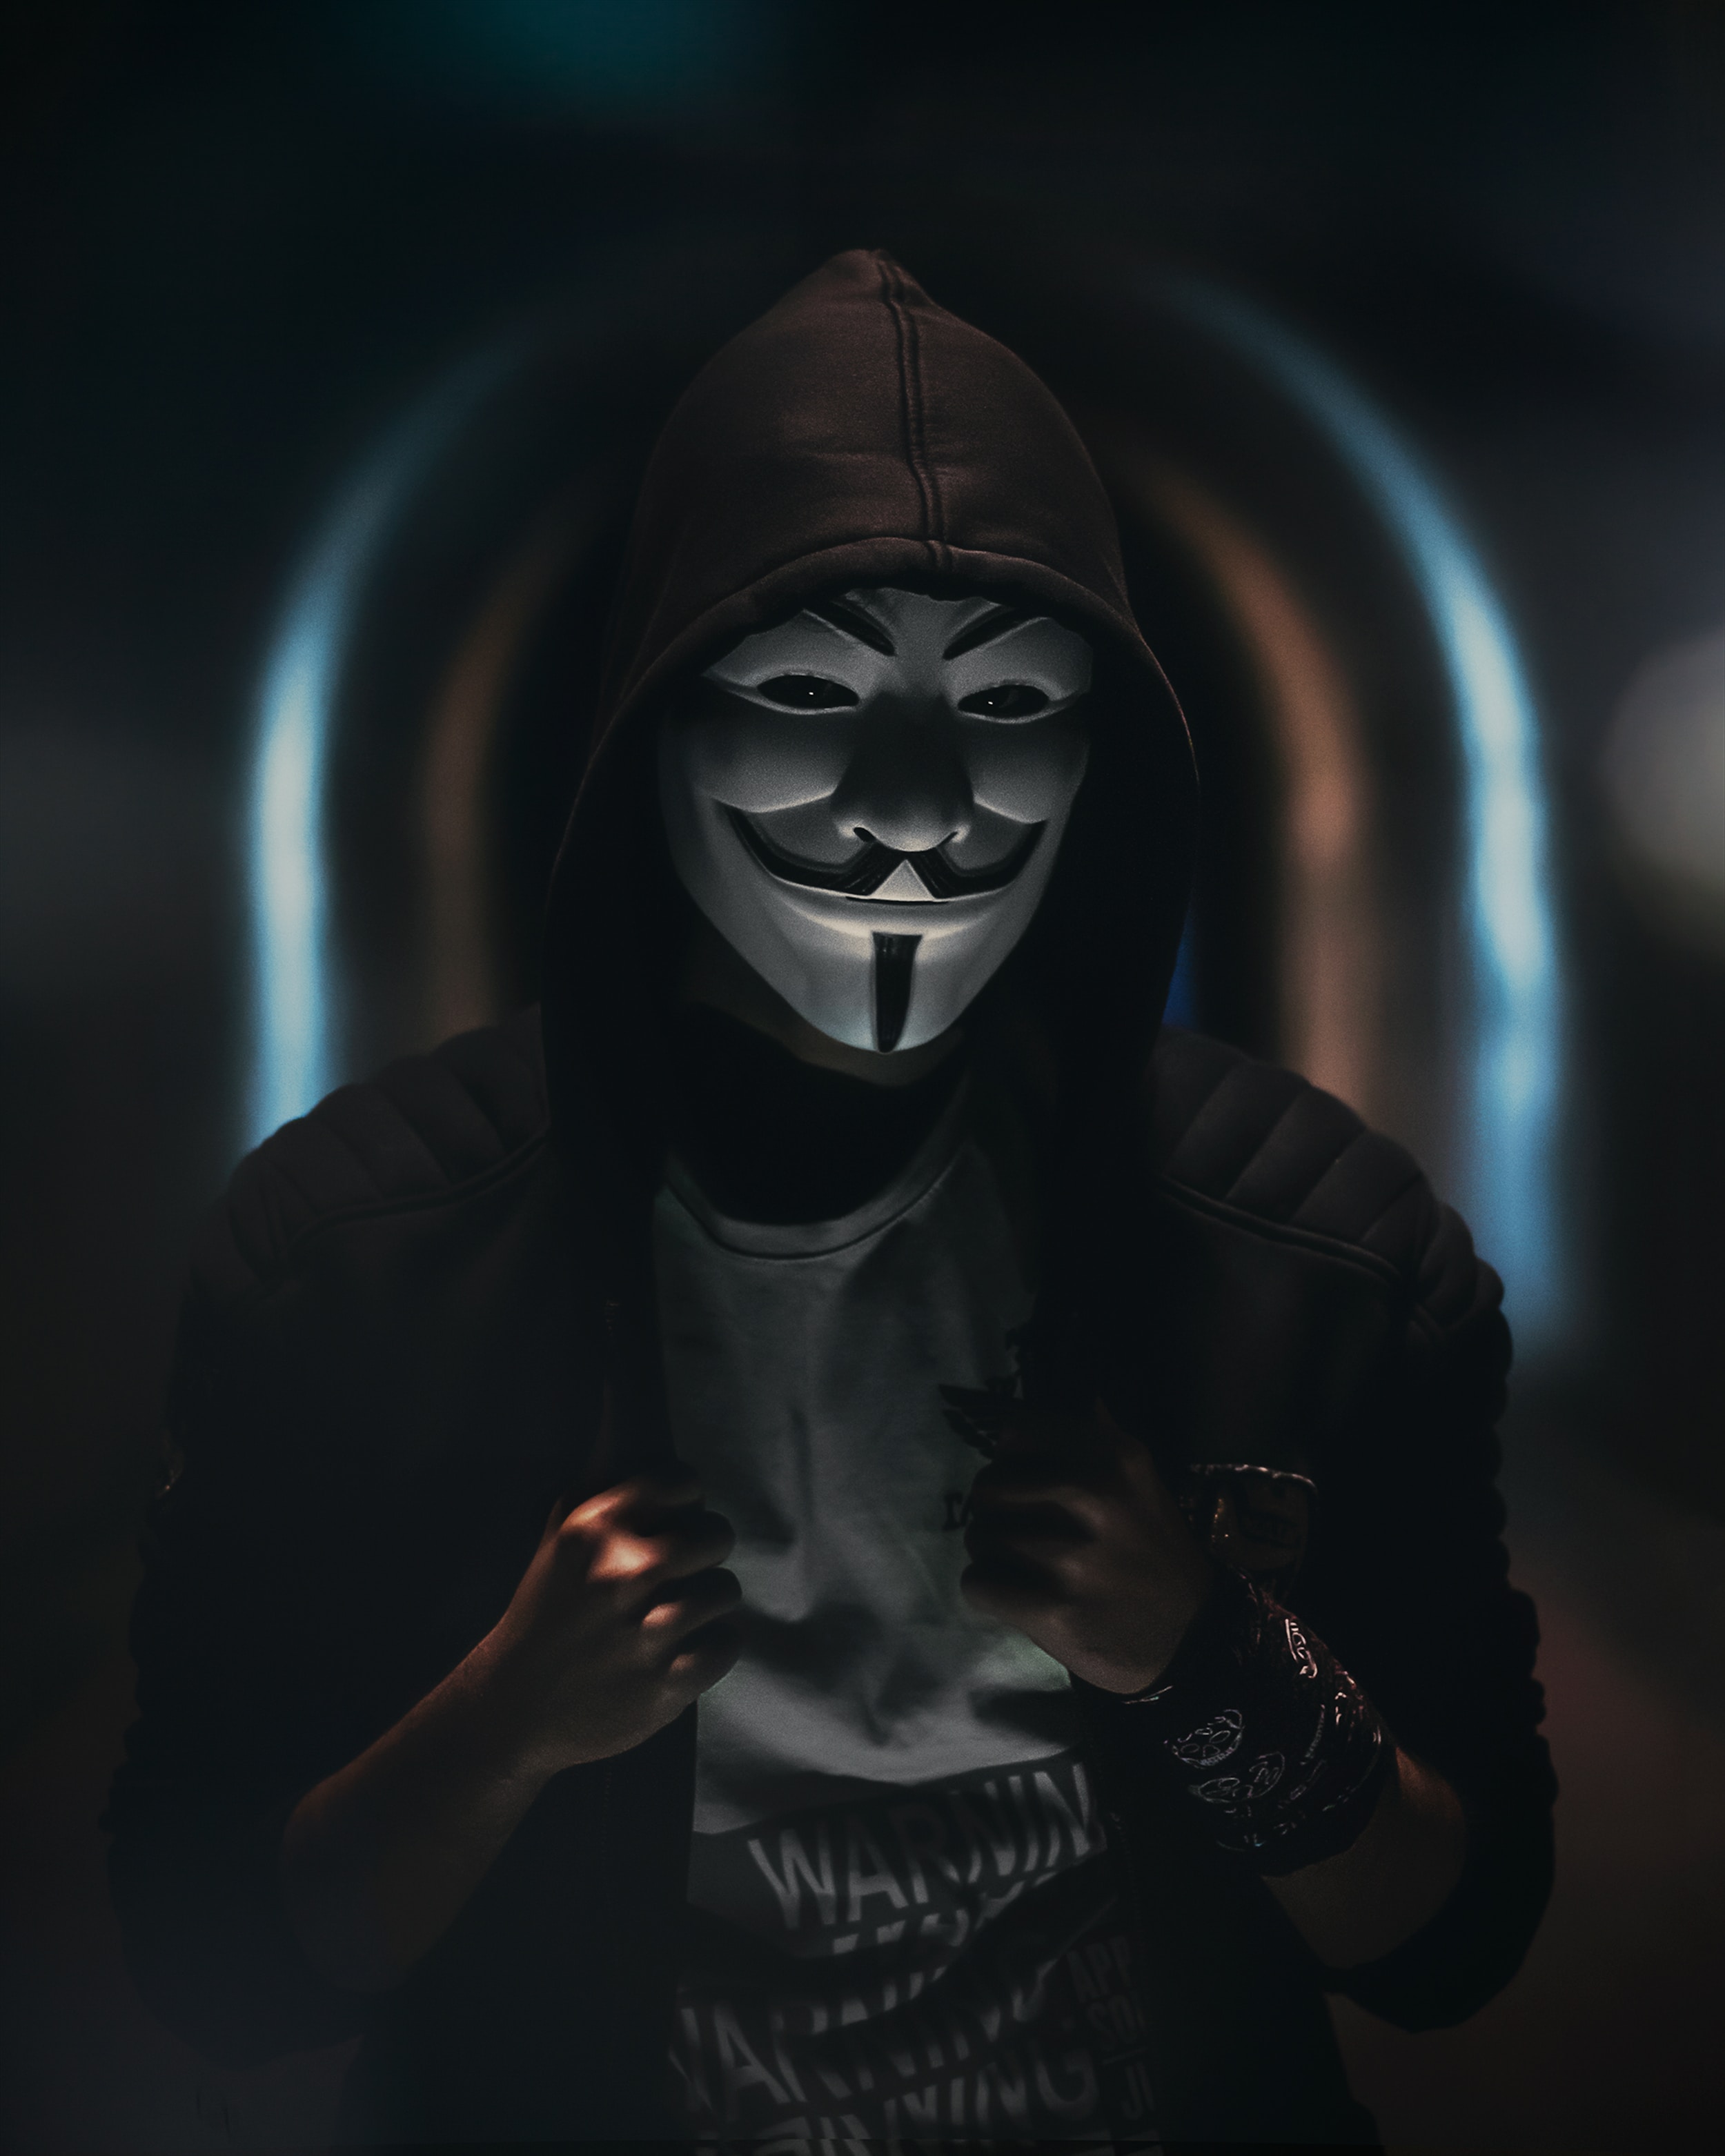 android dark, anonymous, miscellanea, miscellaneous, mask, human, person, hood